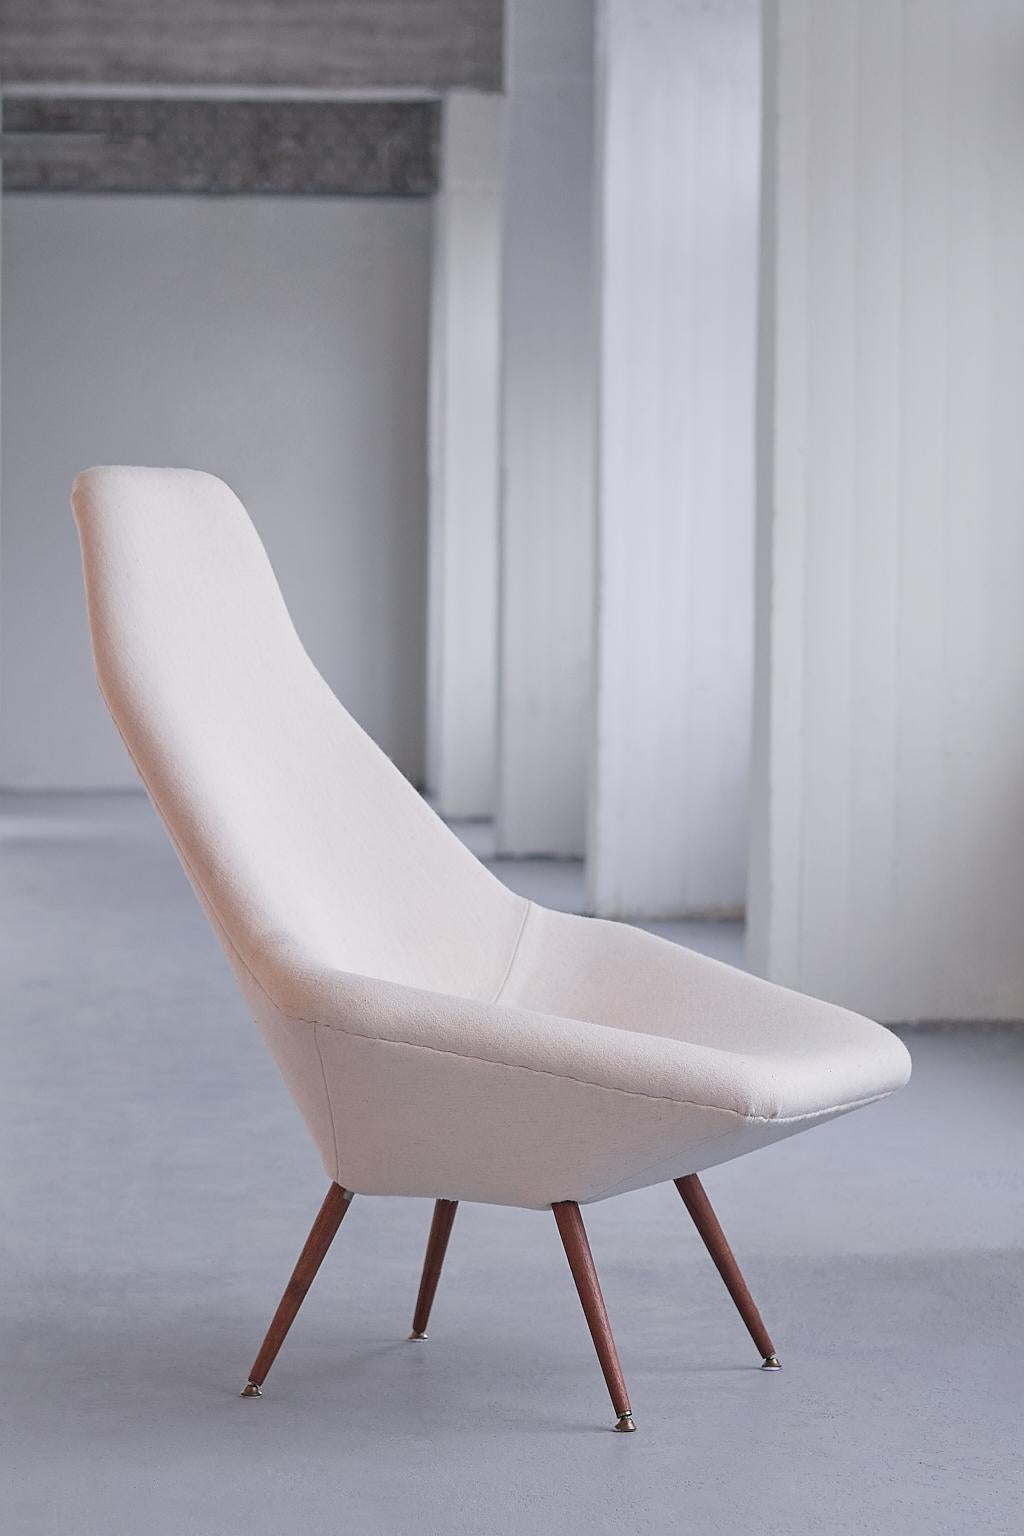 This rare lounge chair was designed by Arne Dahlén in the early 1960s. The design was manufactured by Dahléns Company in the Swedish town Dalum. His company was solely devoted to the production of chairs.

The soft geometric angles give this chair a